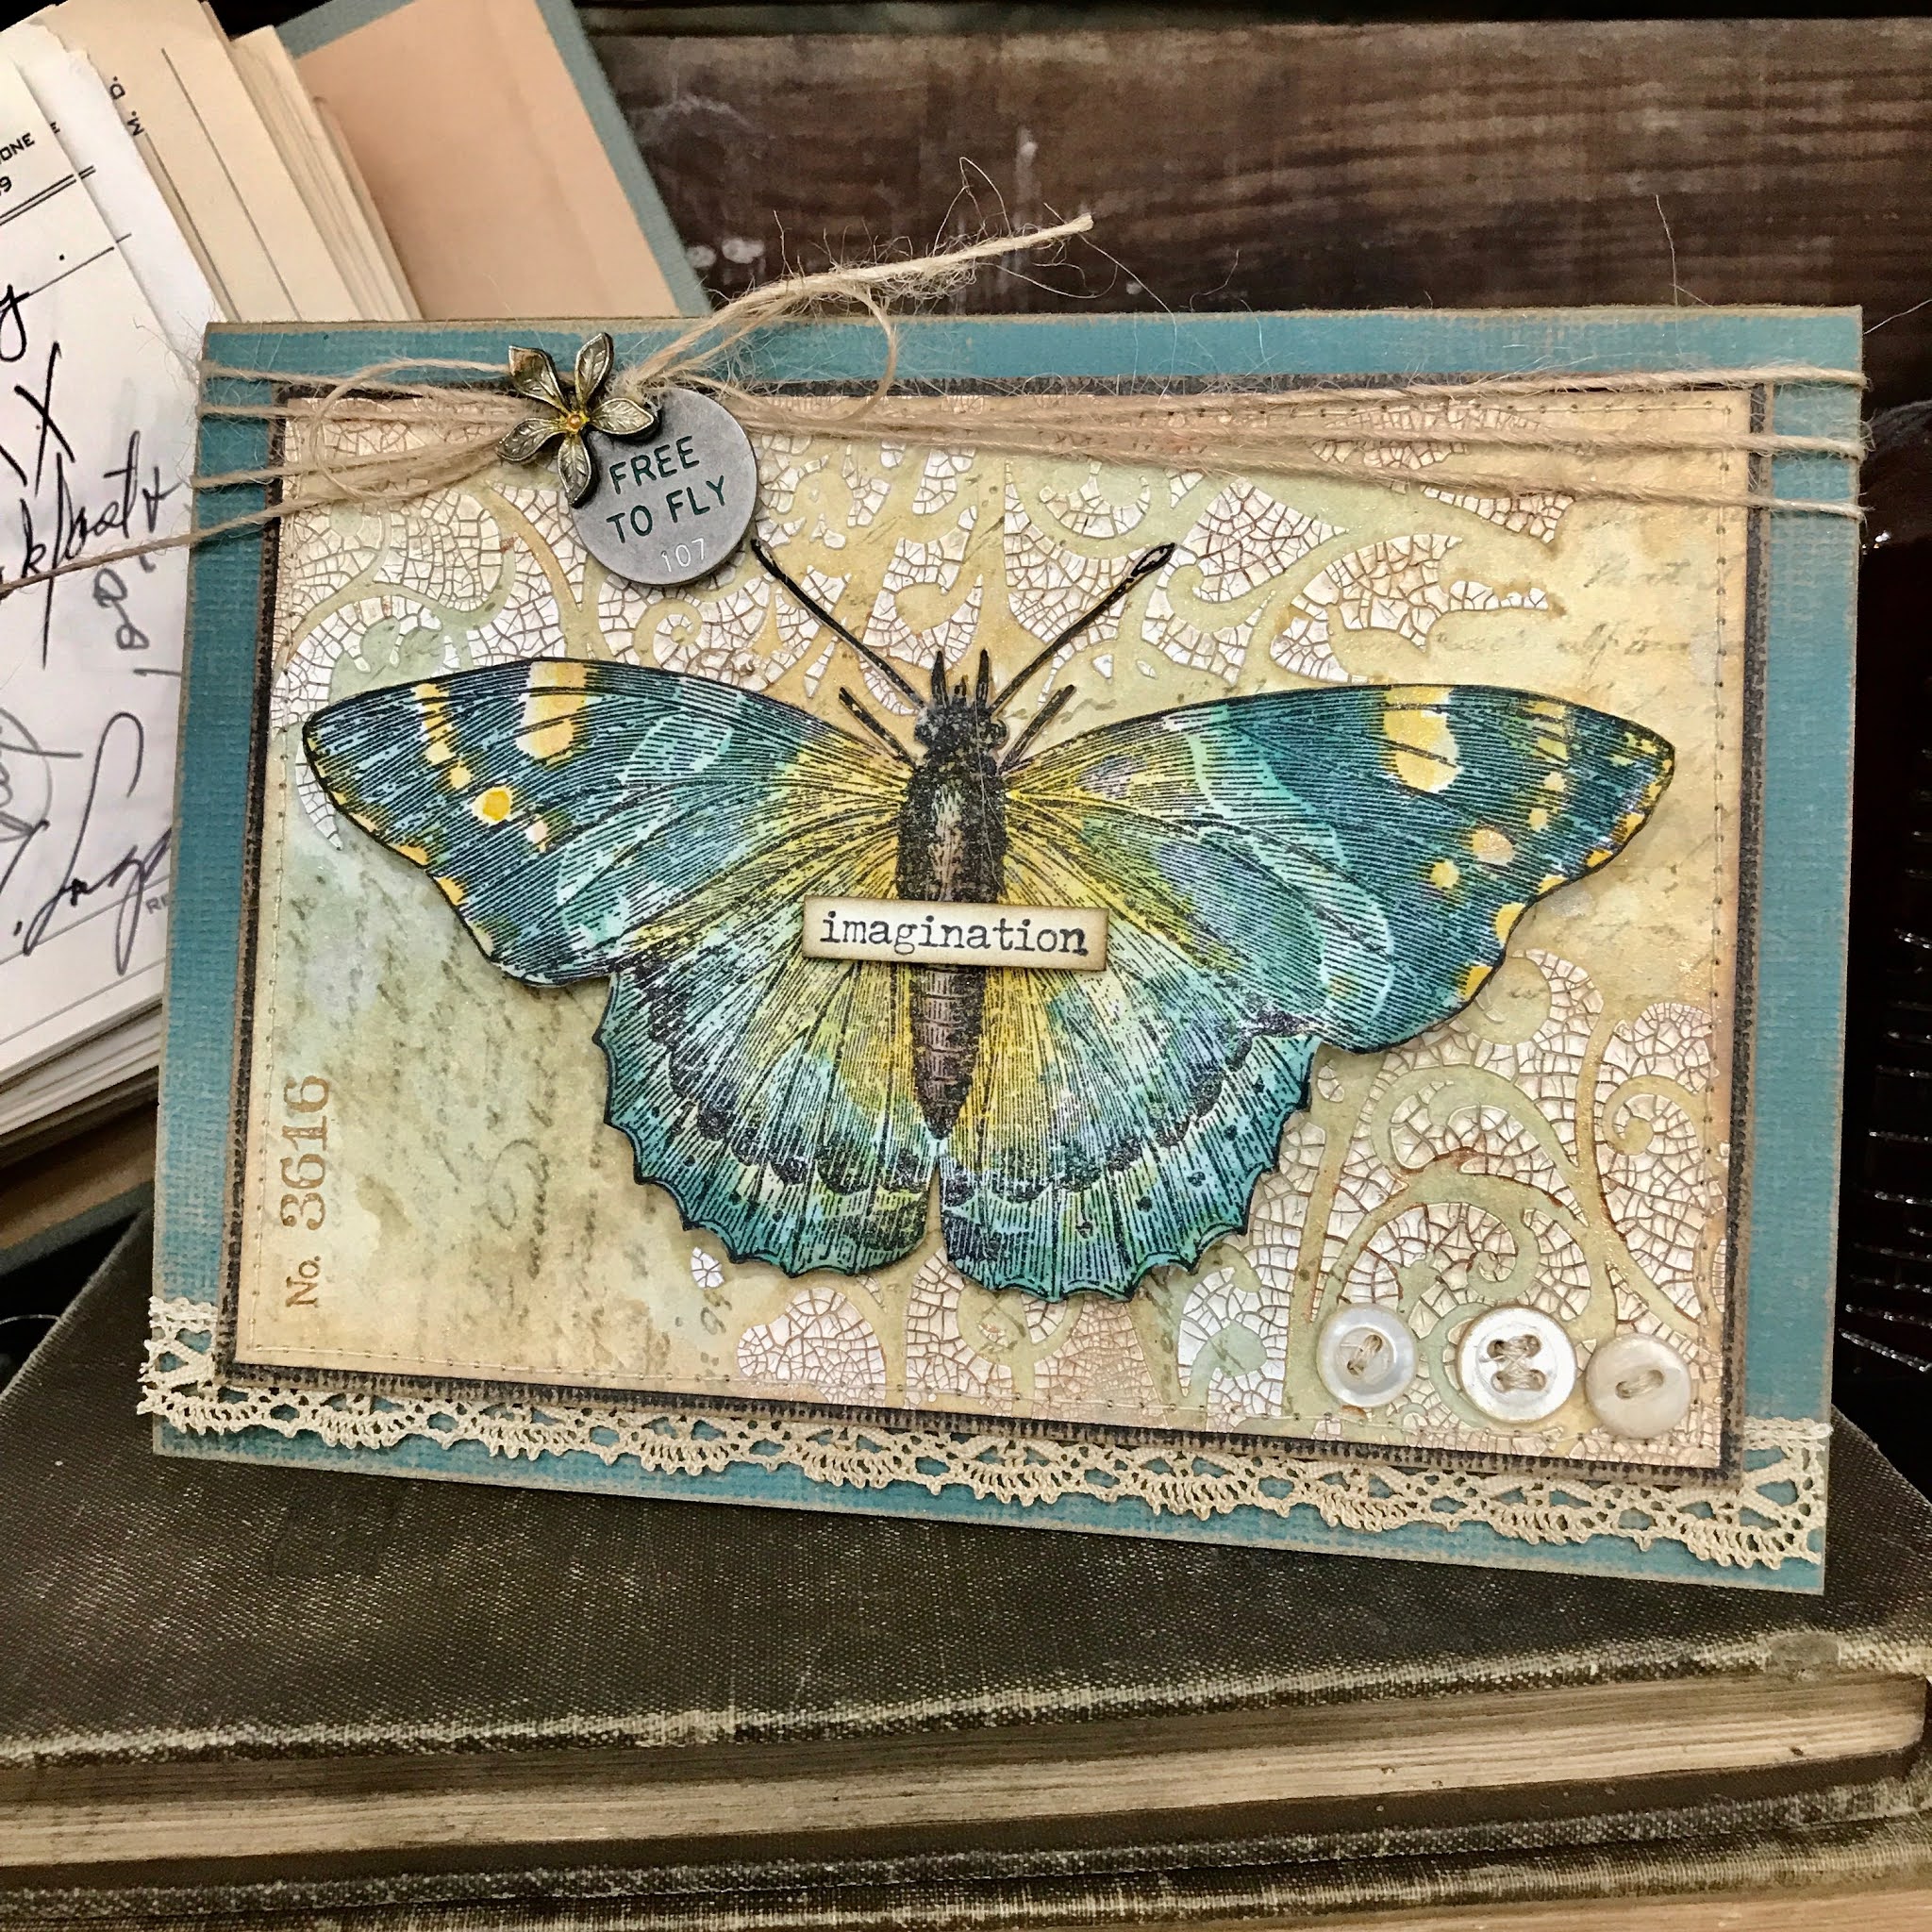 Vintage Butterfly Card with Tim Holtz Distress Inks & Stamps